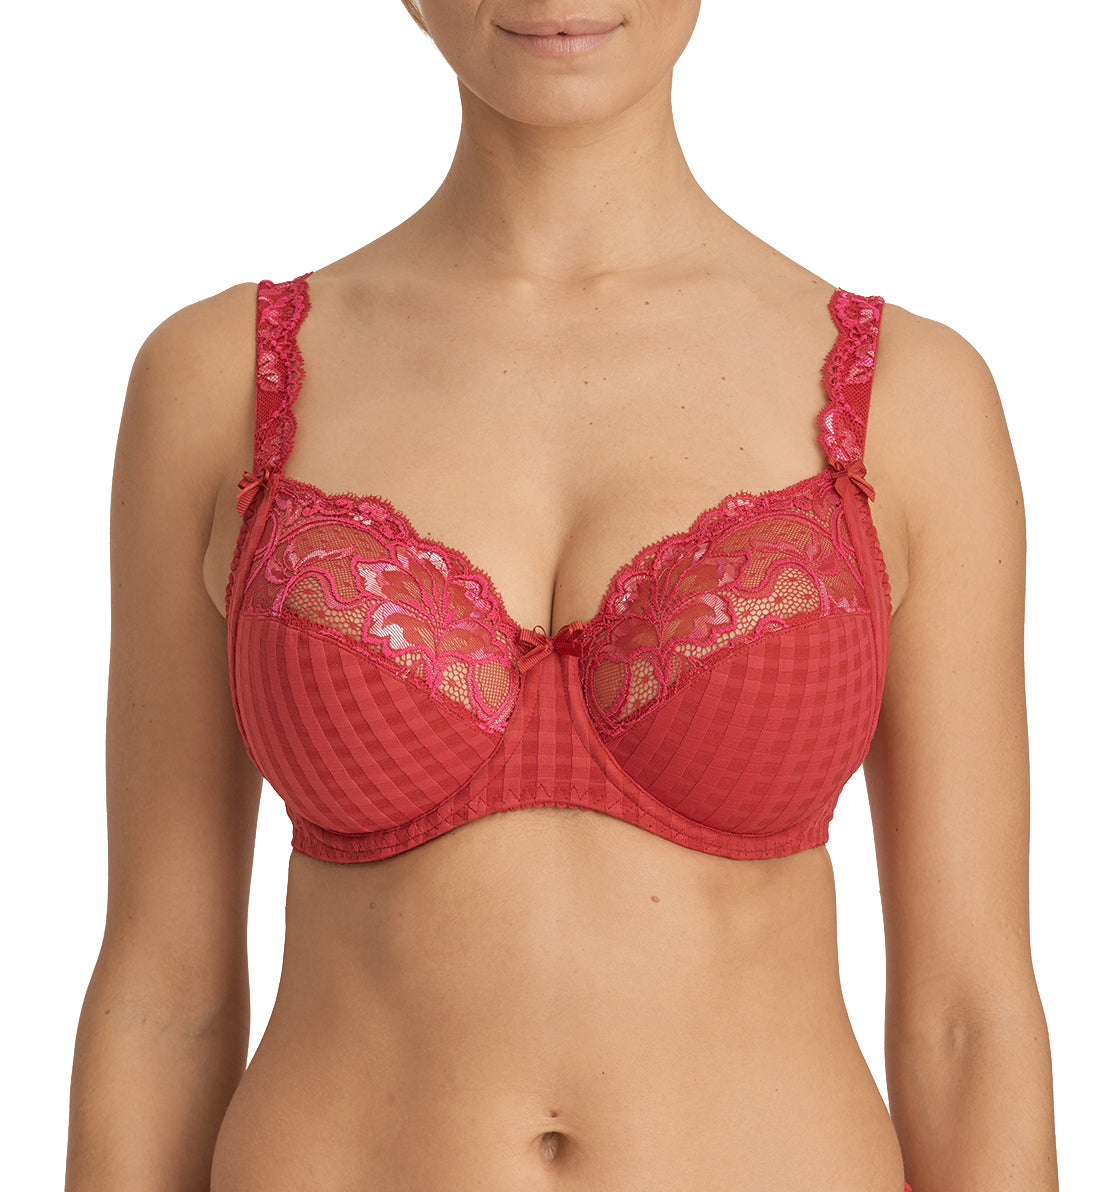 PrimaDonna Madison Full Cup Underwire Bra (0162120),32D,Persian Red - Persian Red,32D